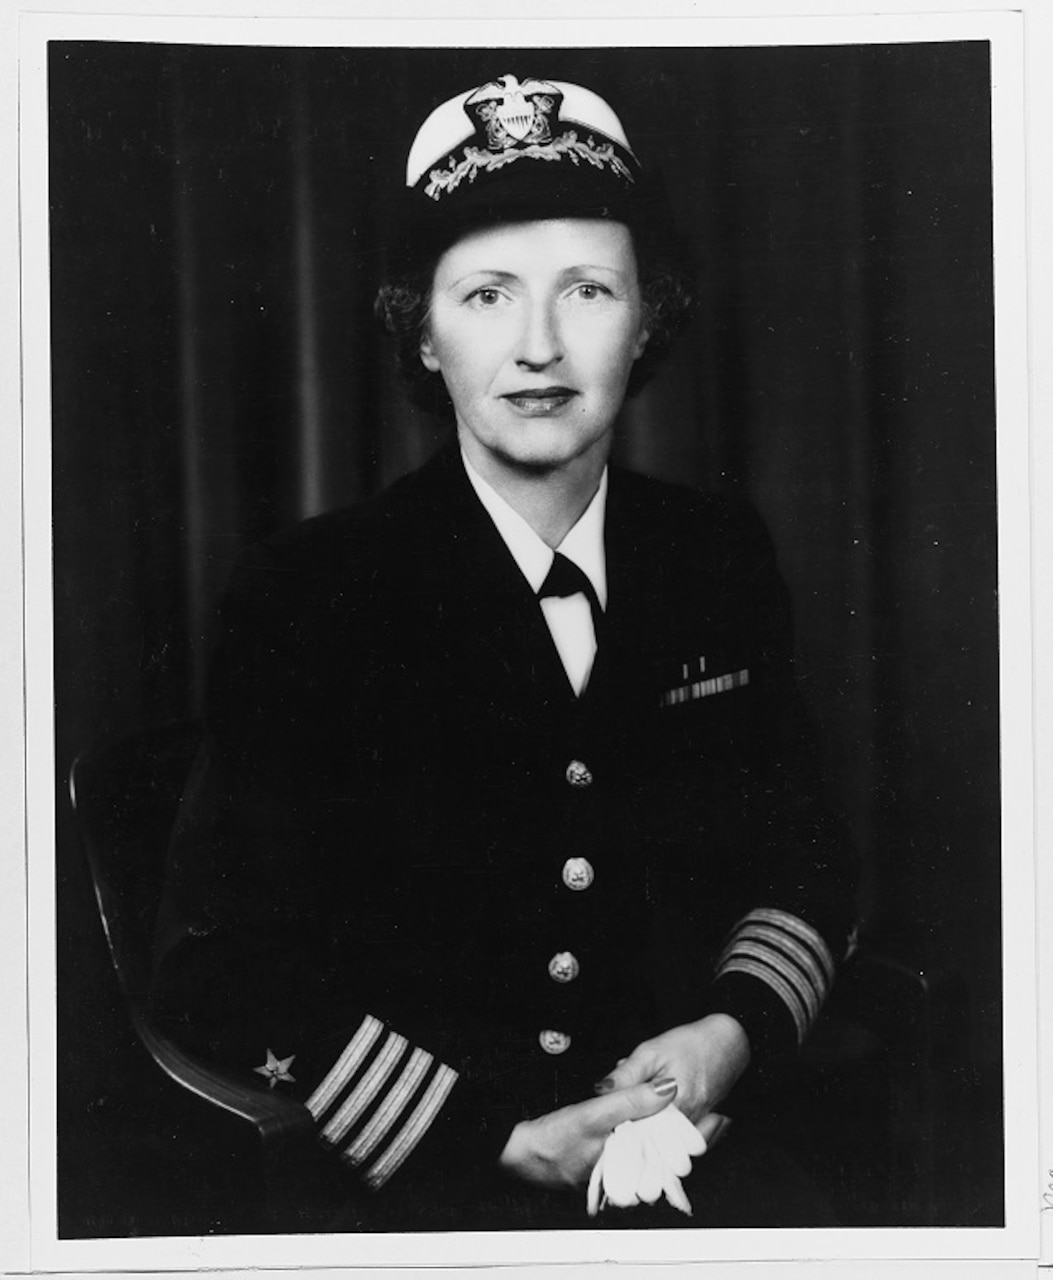 Captain Joy Bright Hancock photographed after her ascent to Assistant Chief of Naval Personnel for Women, ca. 1951. Image courtesy Naval History and Heritage Command (80-G-435203)